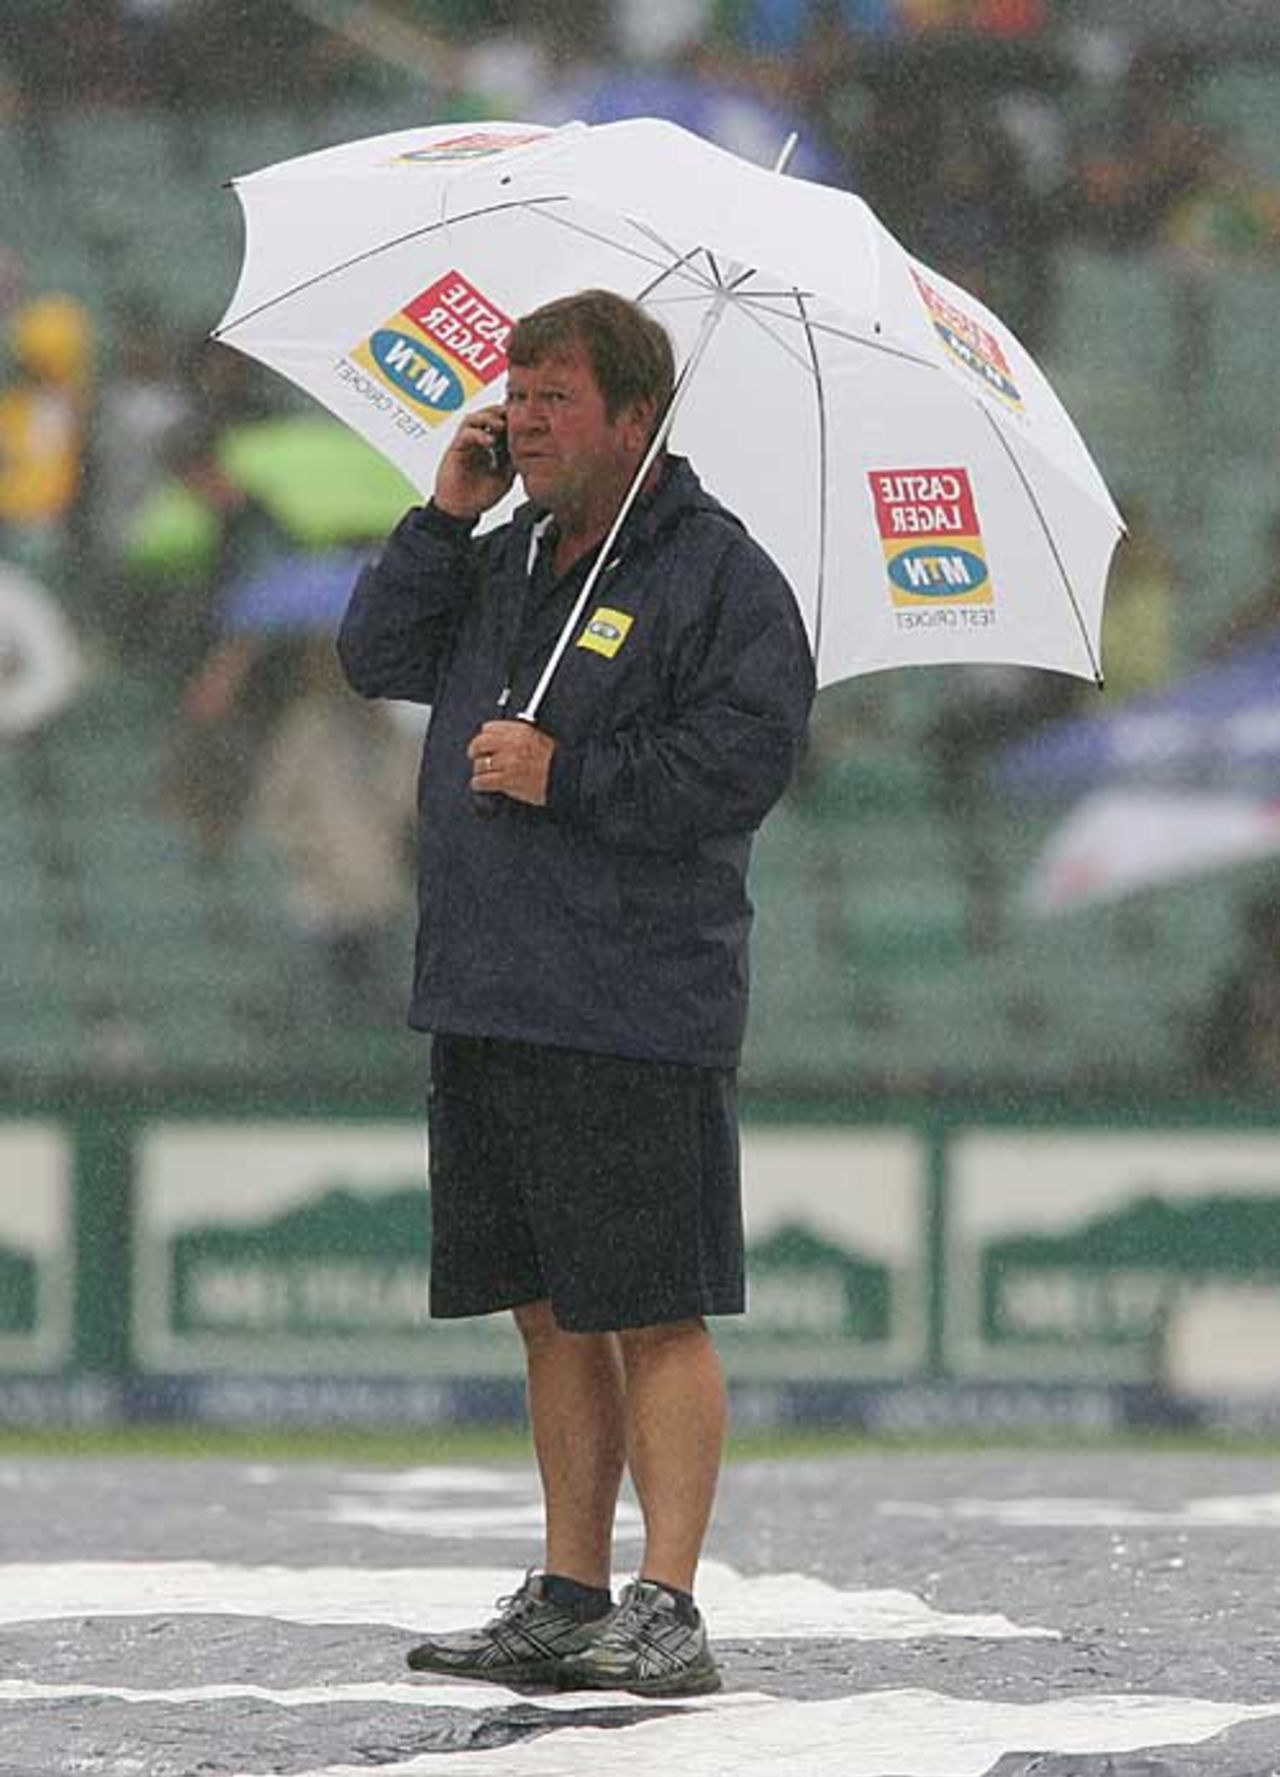 A member of the groundstaff takes cover at the Wanderers, South Africa v India, 1st ODI, Johannesburg, November 19, 2006